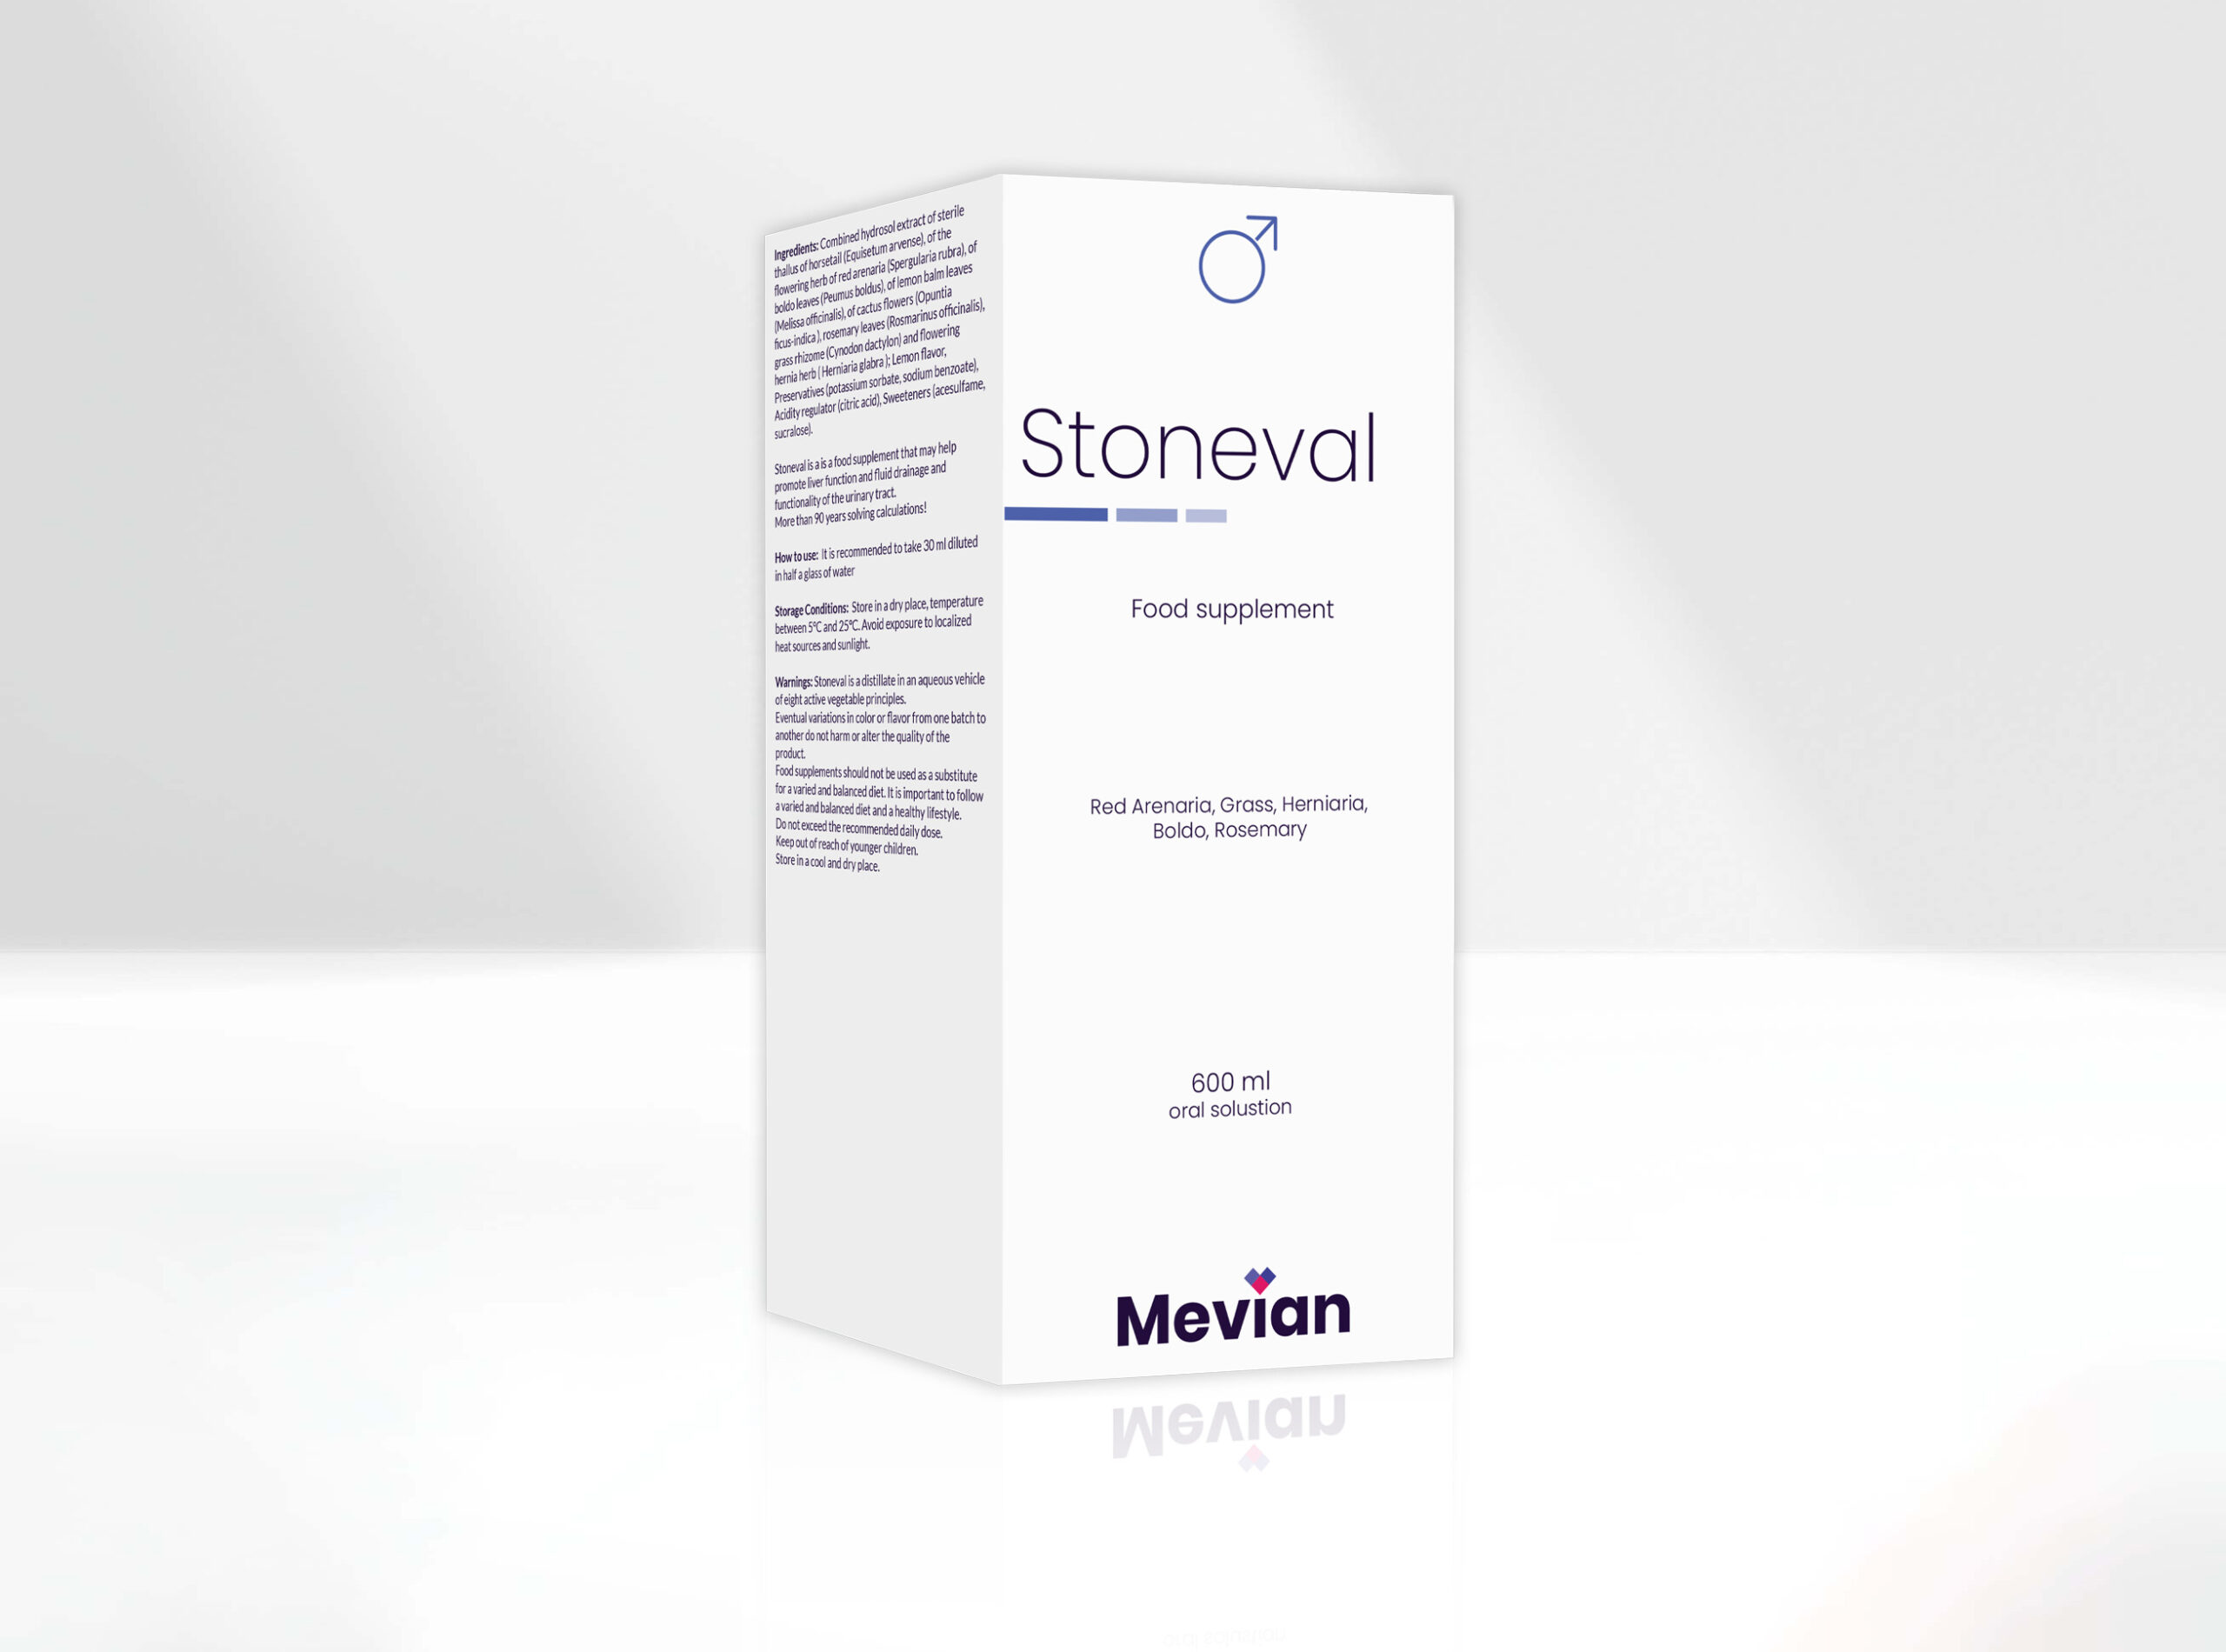 Stoneval is ideal for kidney stones (Nephrolithiasis) and Uric Acid which is mainly produced based on the unique distillation of over 6 medicinal plants. Supported by an In vitro-study and an efficacy study.